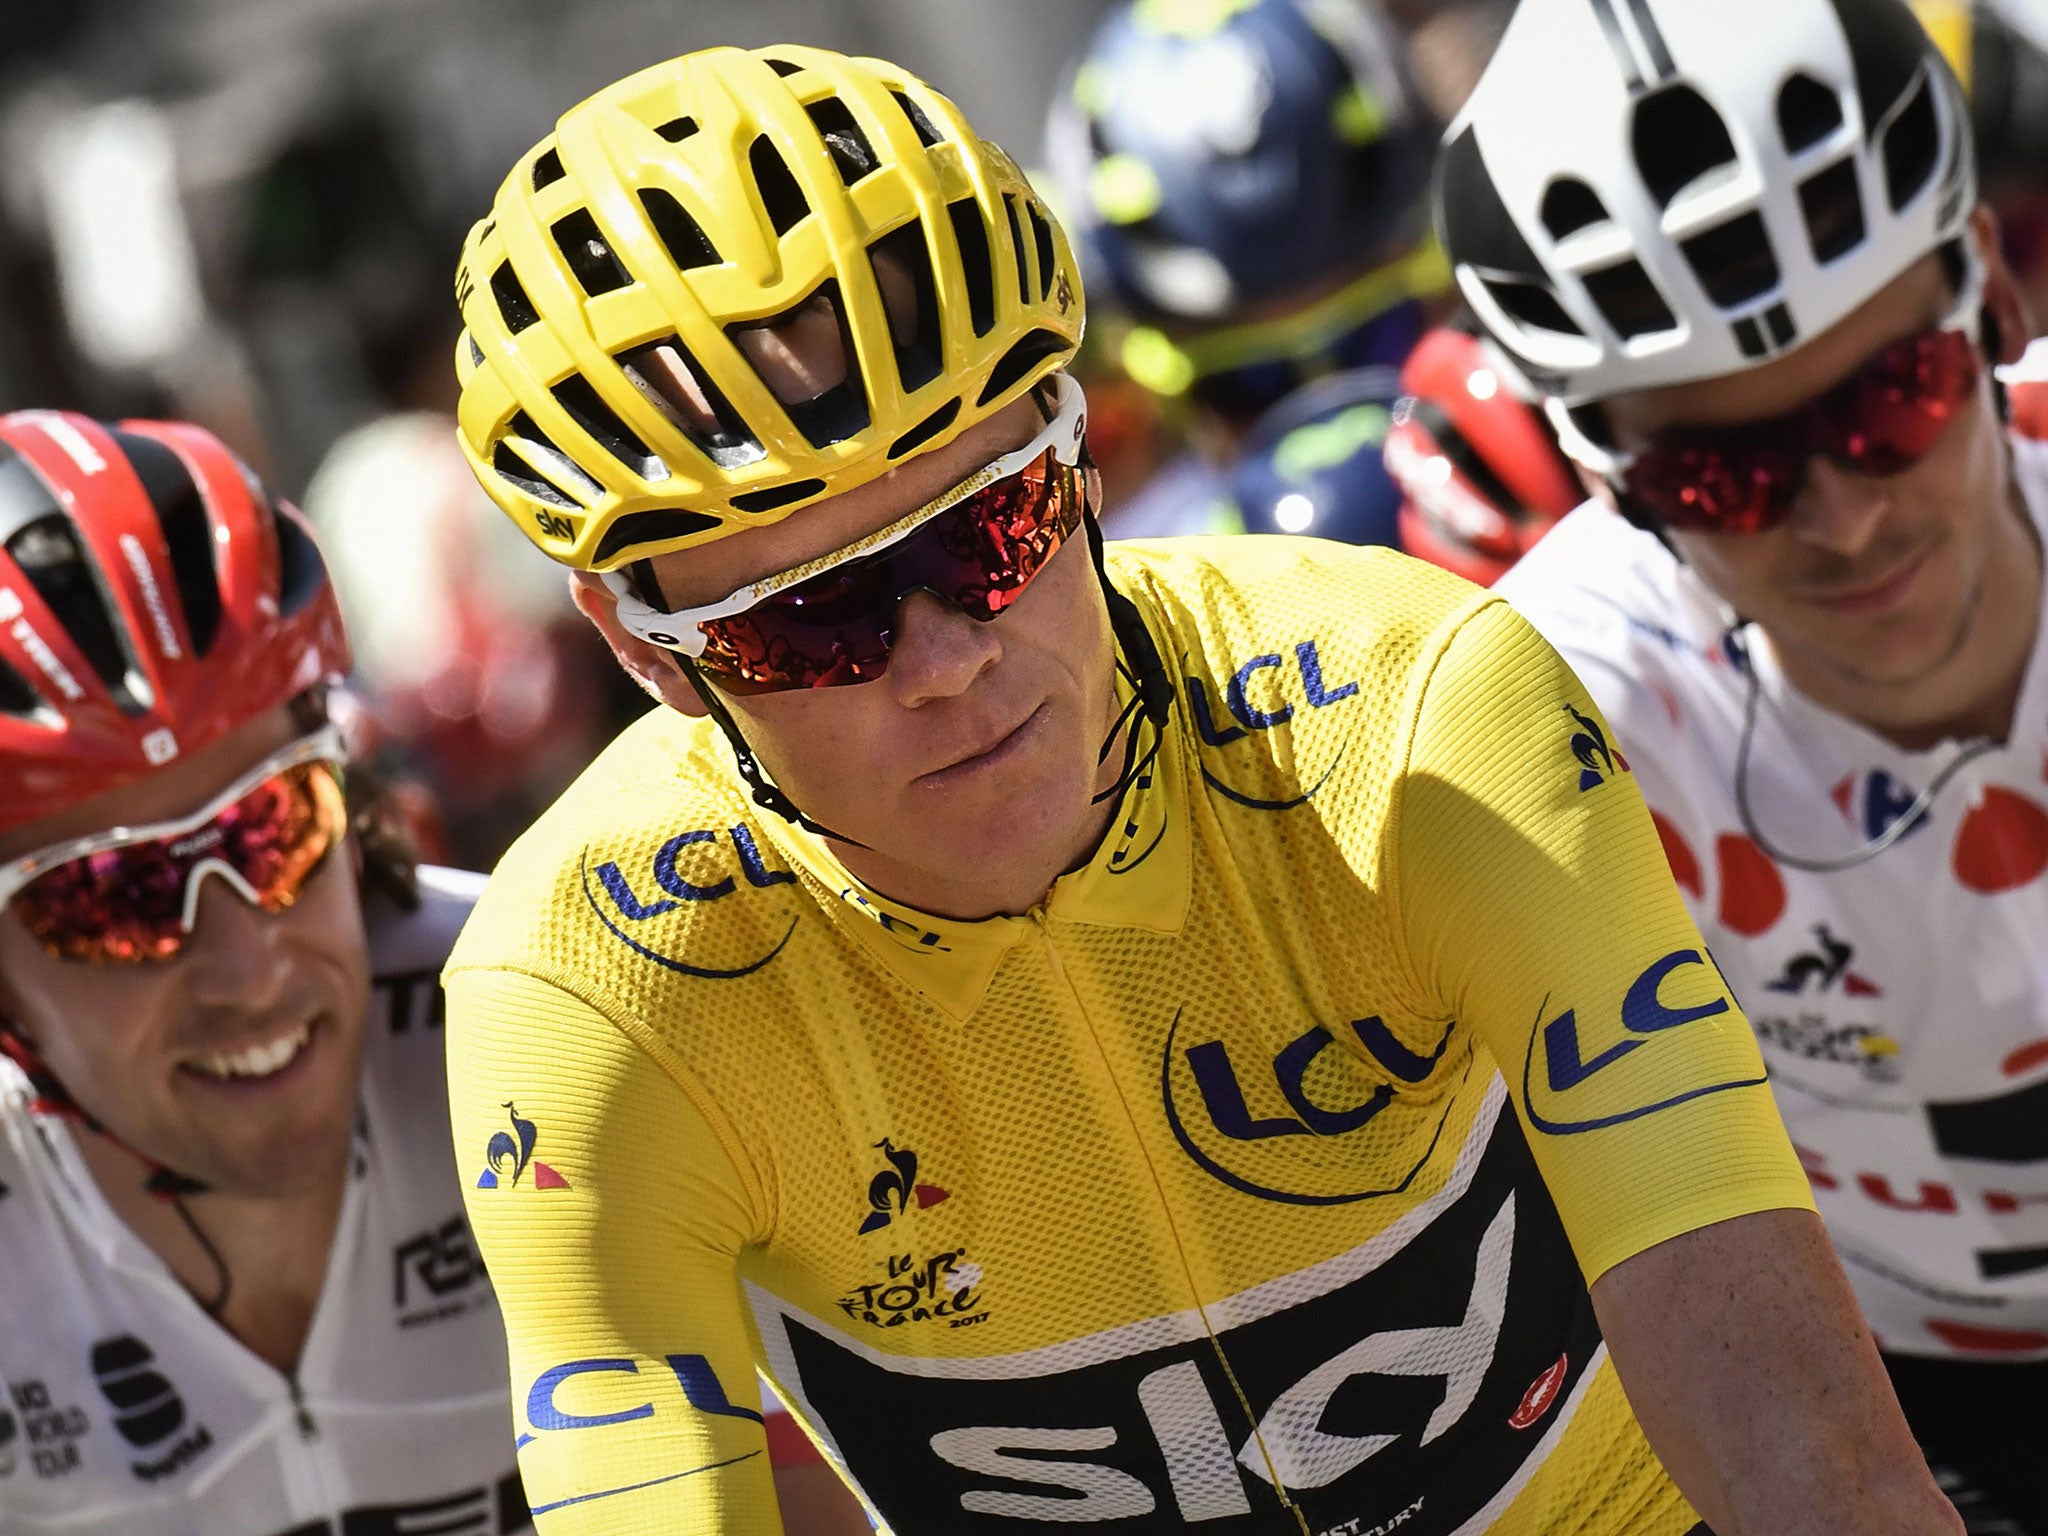 Chris Froome leads the Tour by 18 seconds